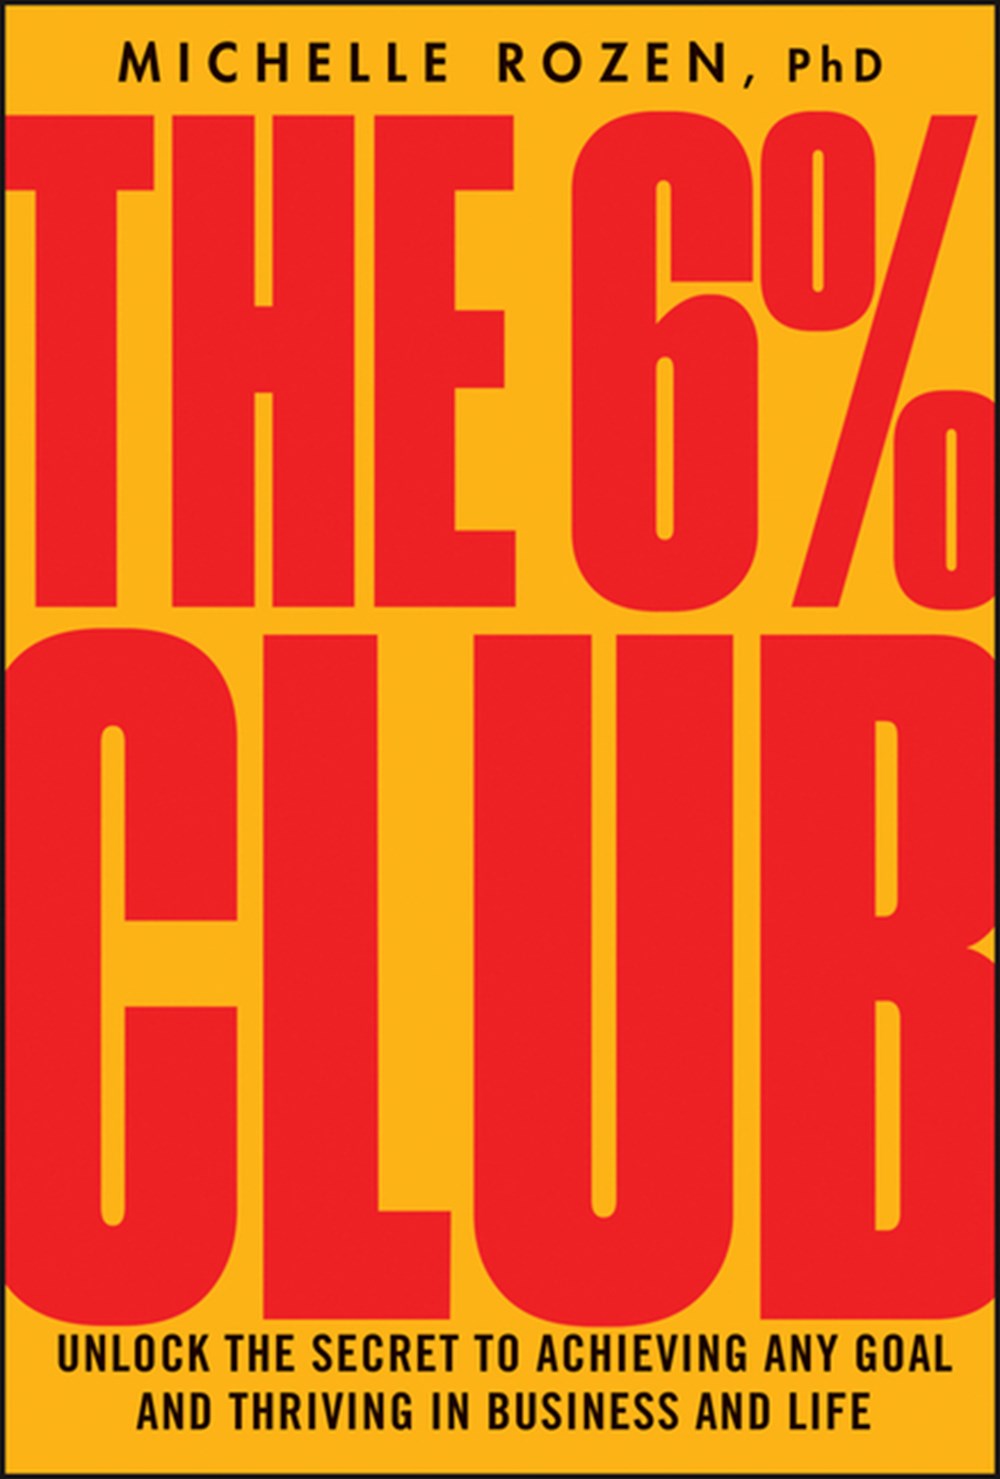 6% Club: Unlock the Secret to Achieving Any Goal and Thriving in Business and Life